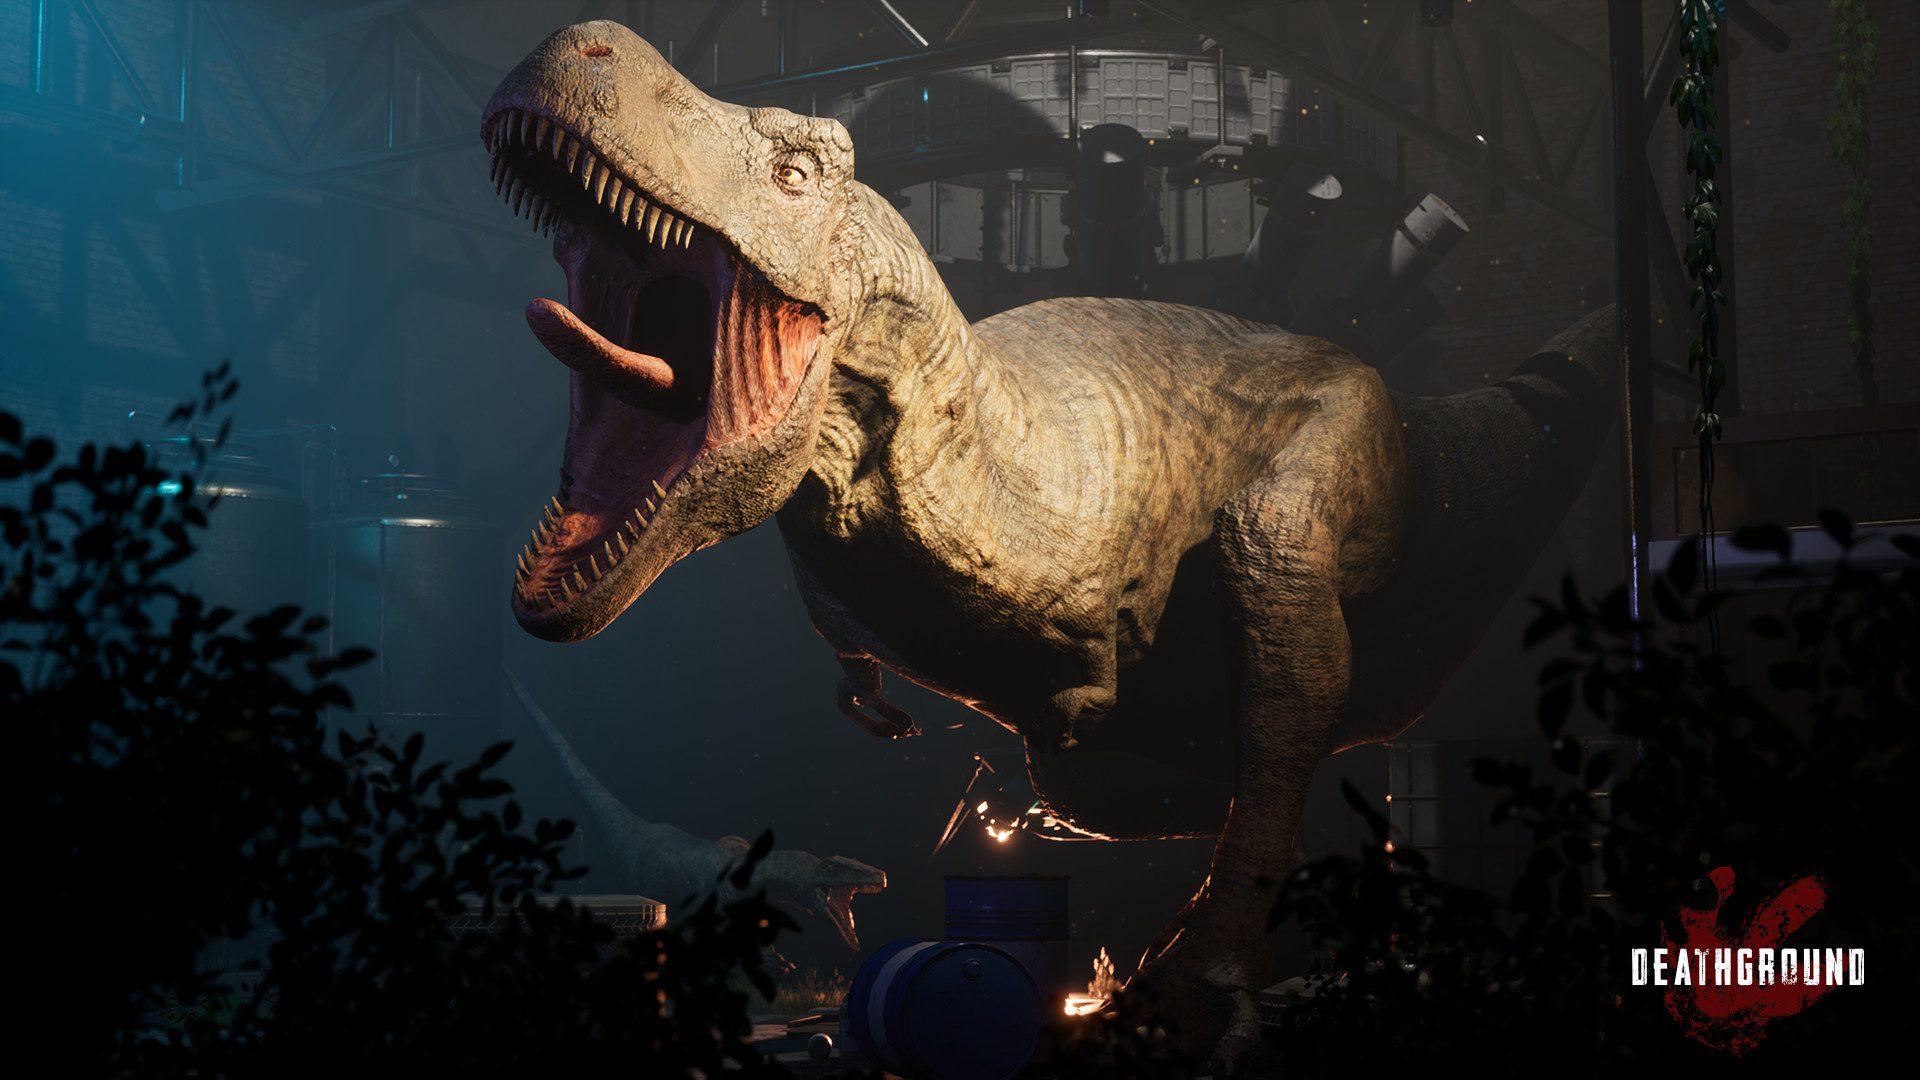 ‘Deathground’ is a survival horror game with Dinosaurs!